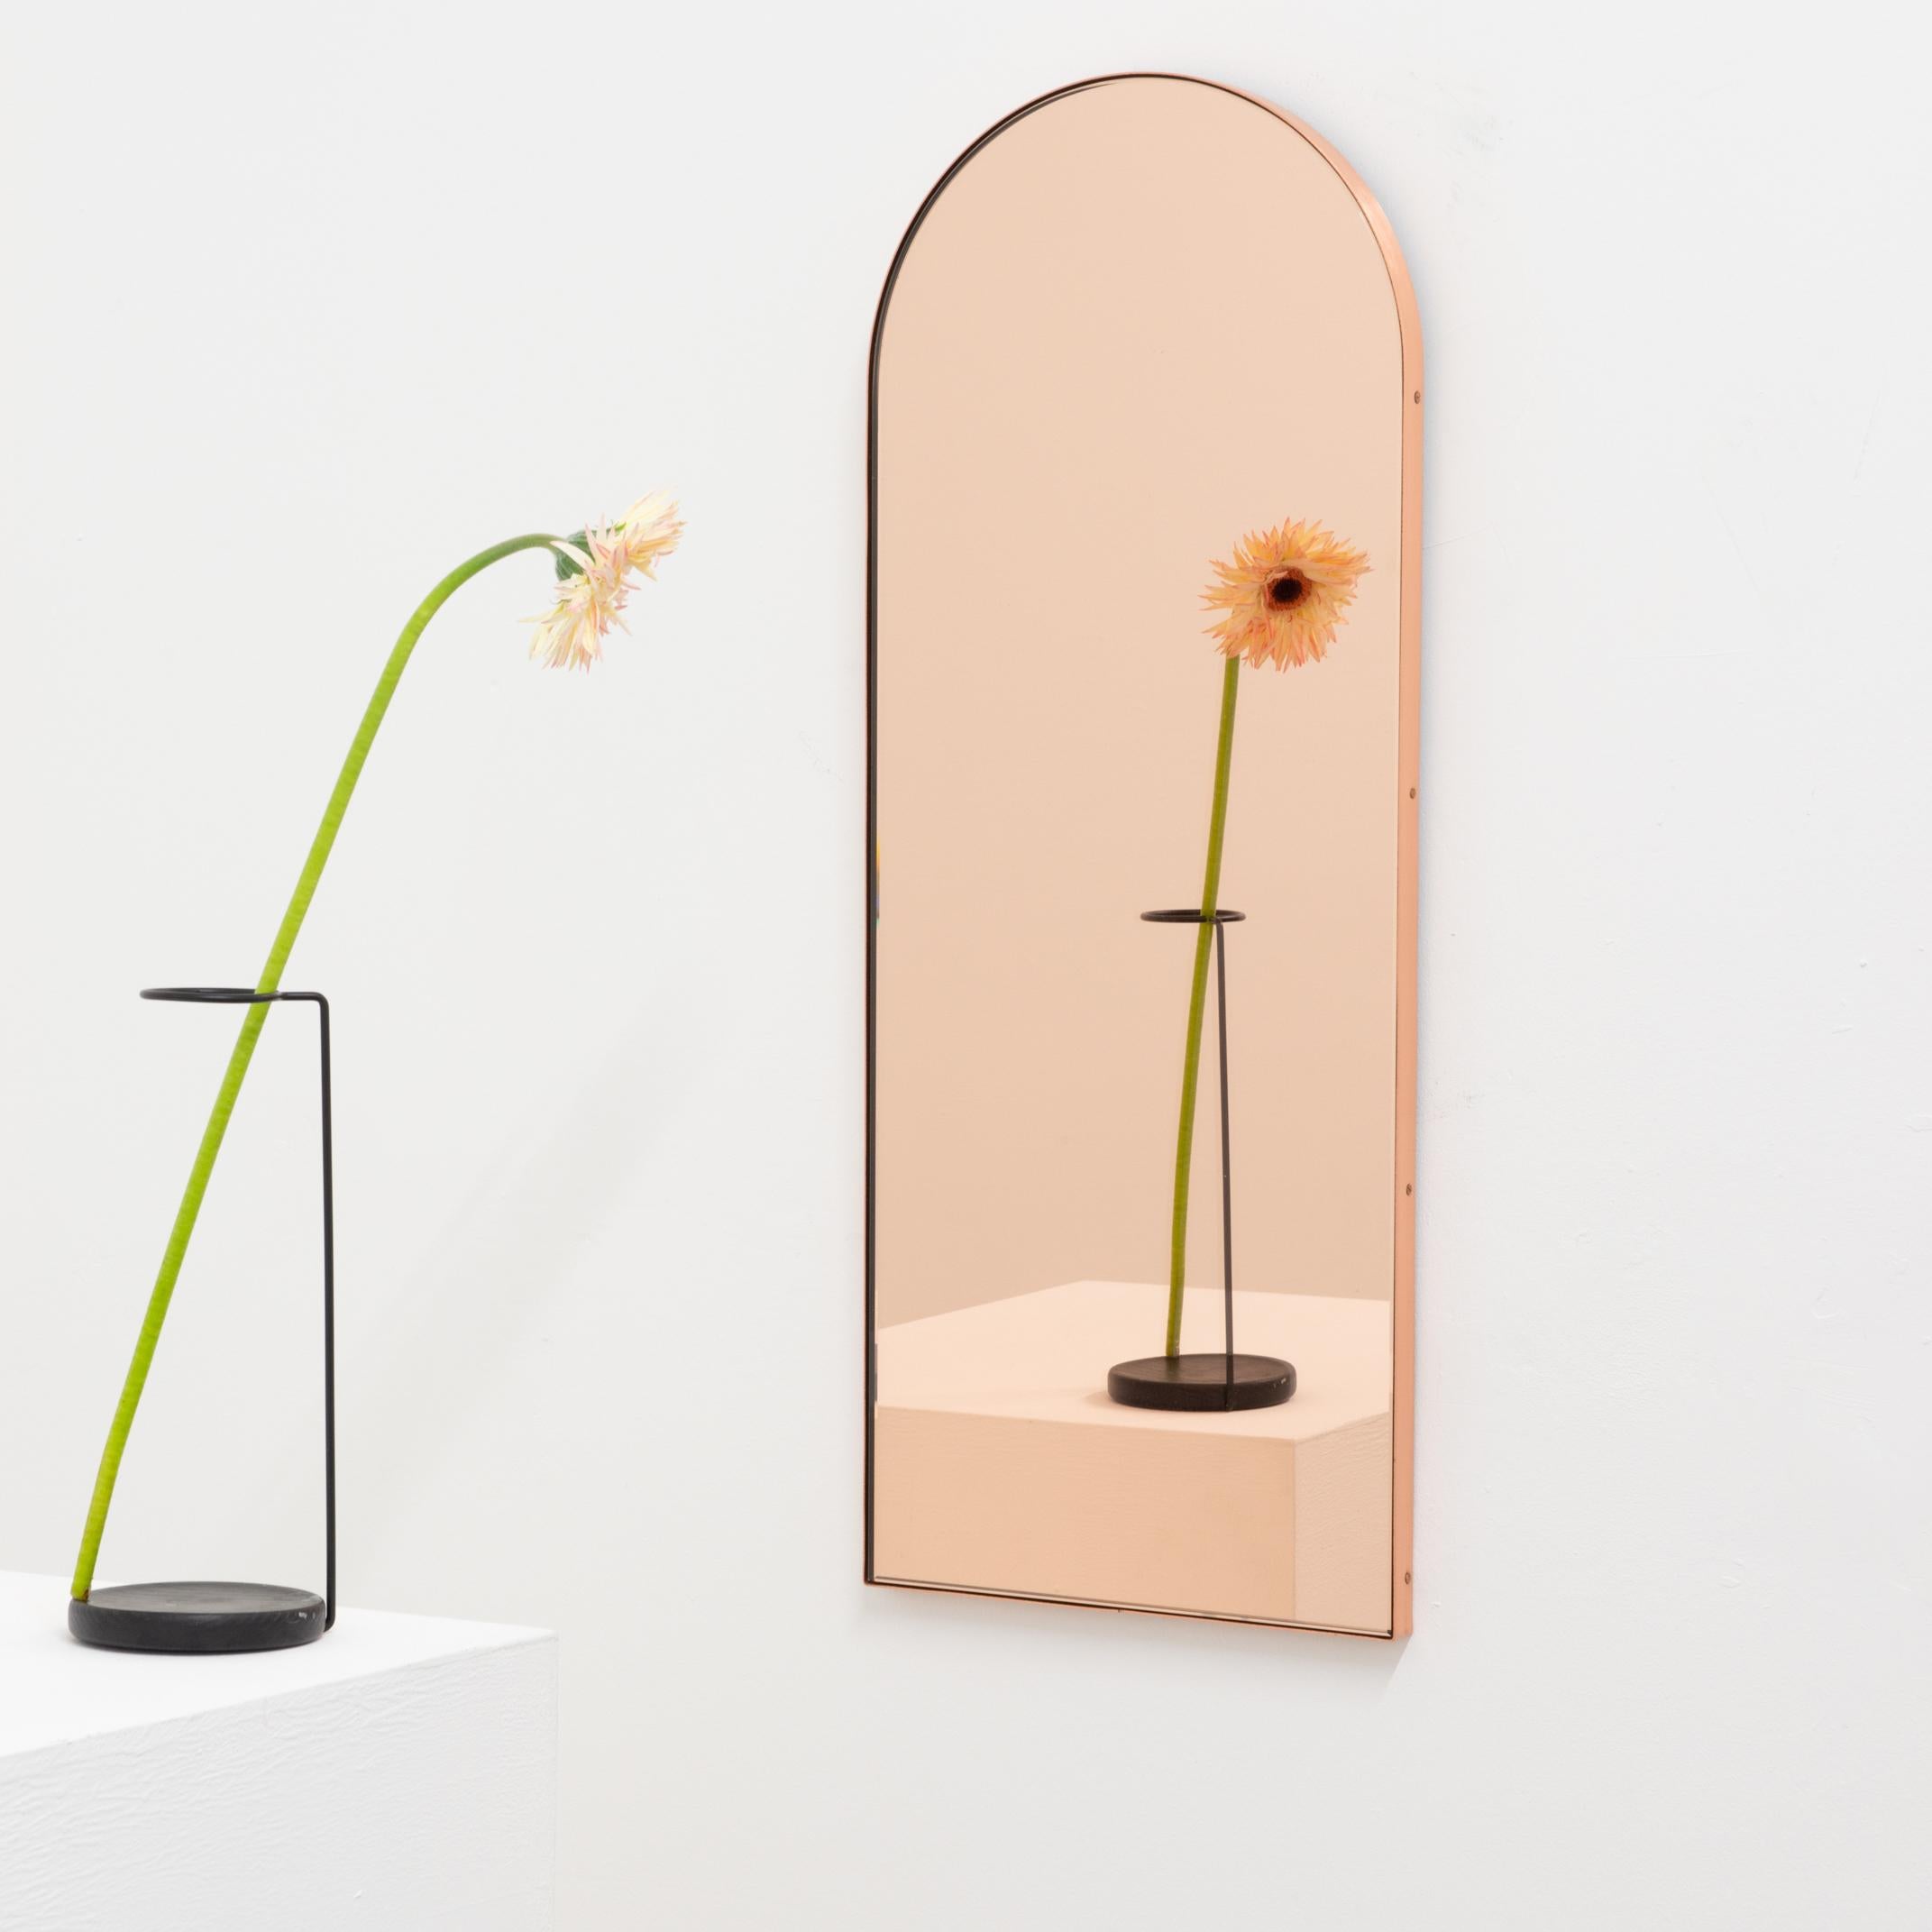 Minimalist arch shaped rose gold/peach mirror with an elegant copper frame. Designed and handcrafted in London, UK. The detailing and finish, including copper plated visible screws, emphasise the Craft and quality feel of the mirror, a true